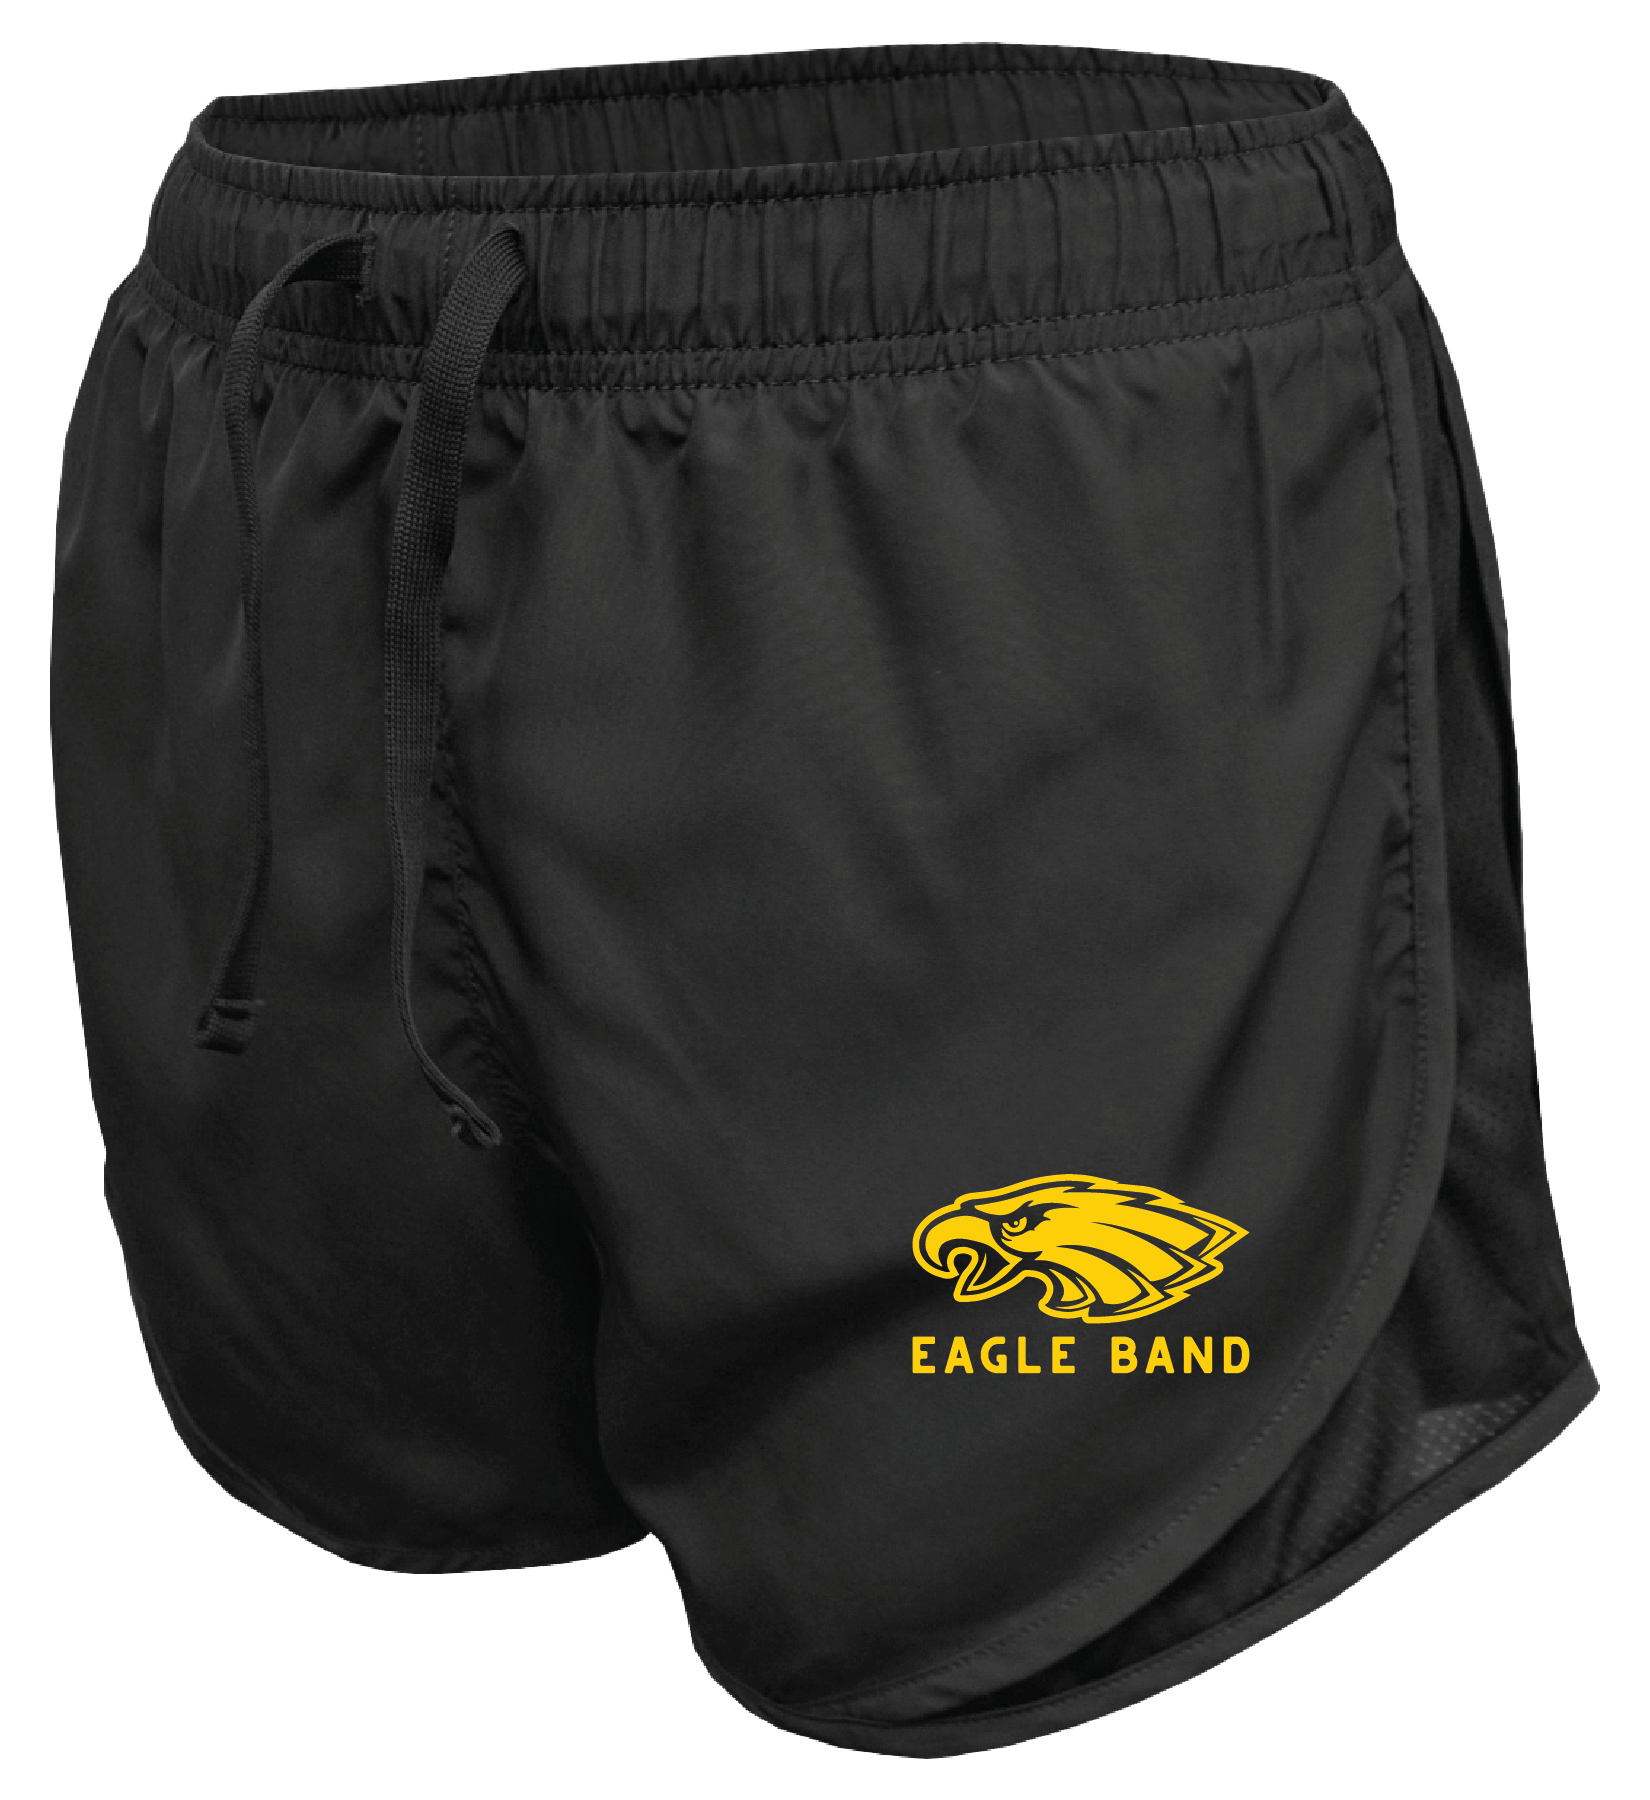 Pecos Band Women's Shorts - REQUIRED